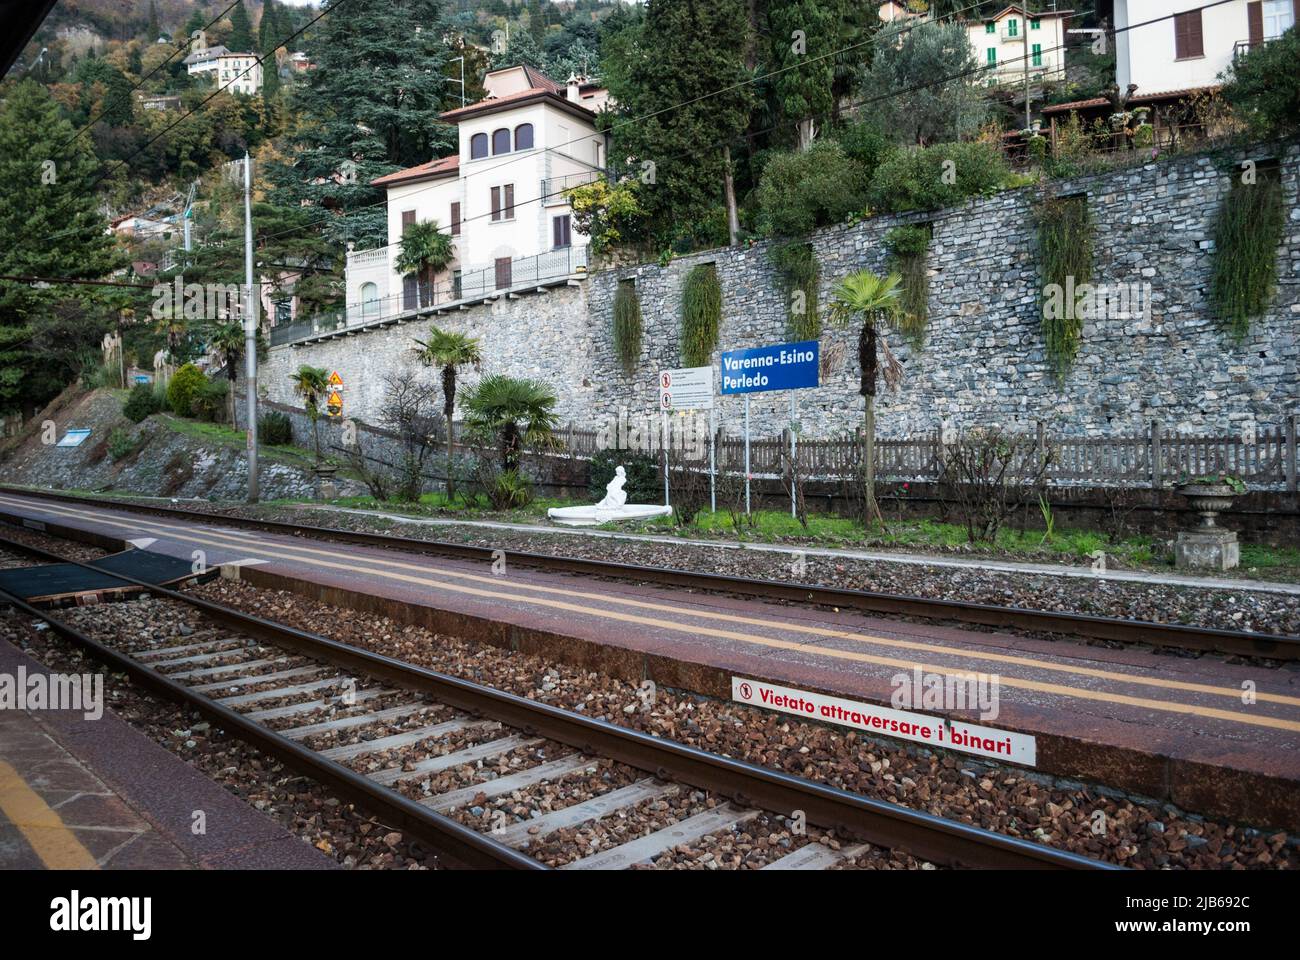 Railway Station served by Tiranoâ. “Lecco railway. Varenna, Lake Como Region, Province of Lecco, Lombardy, Italy. Stock Photo